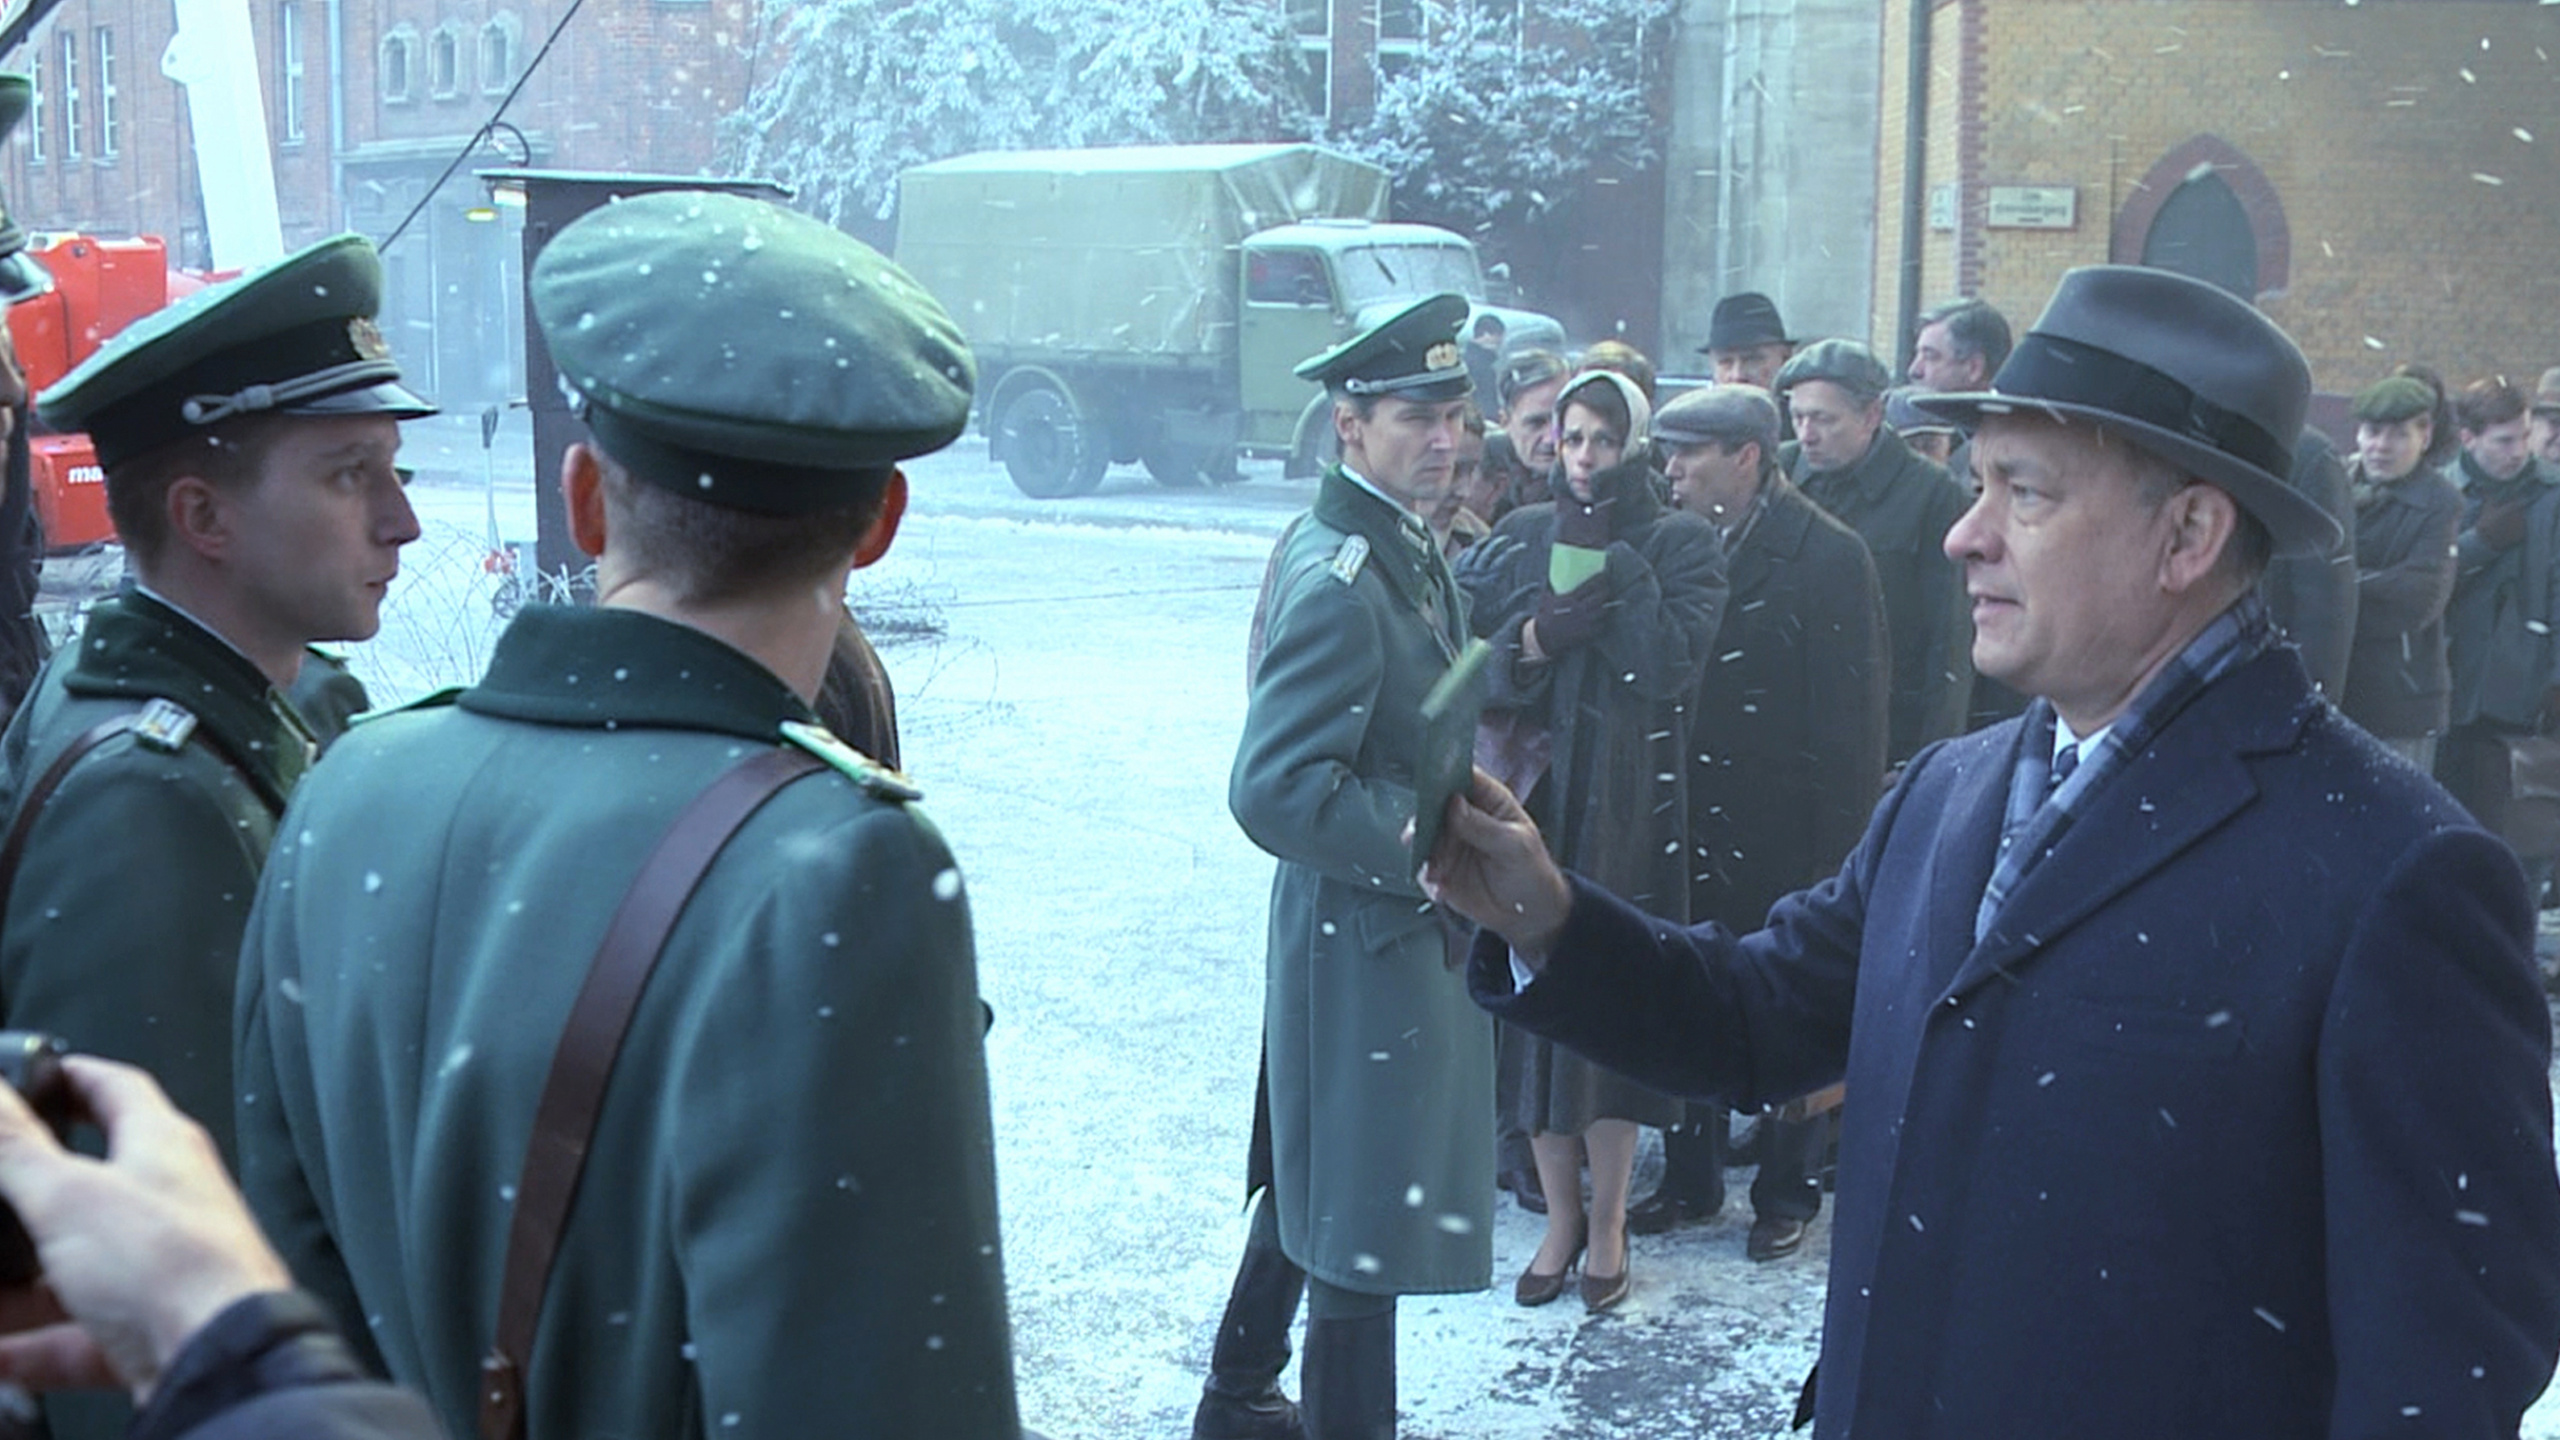 Bridge of Spies, Movies Anywhere, Digital library, Movie collection, 2560x1440 HD Desktop